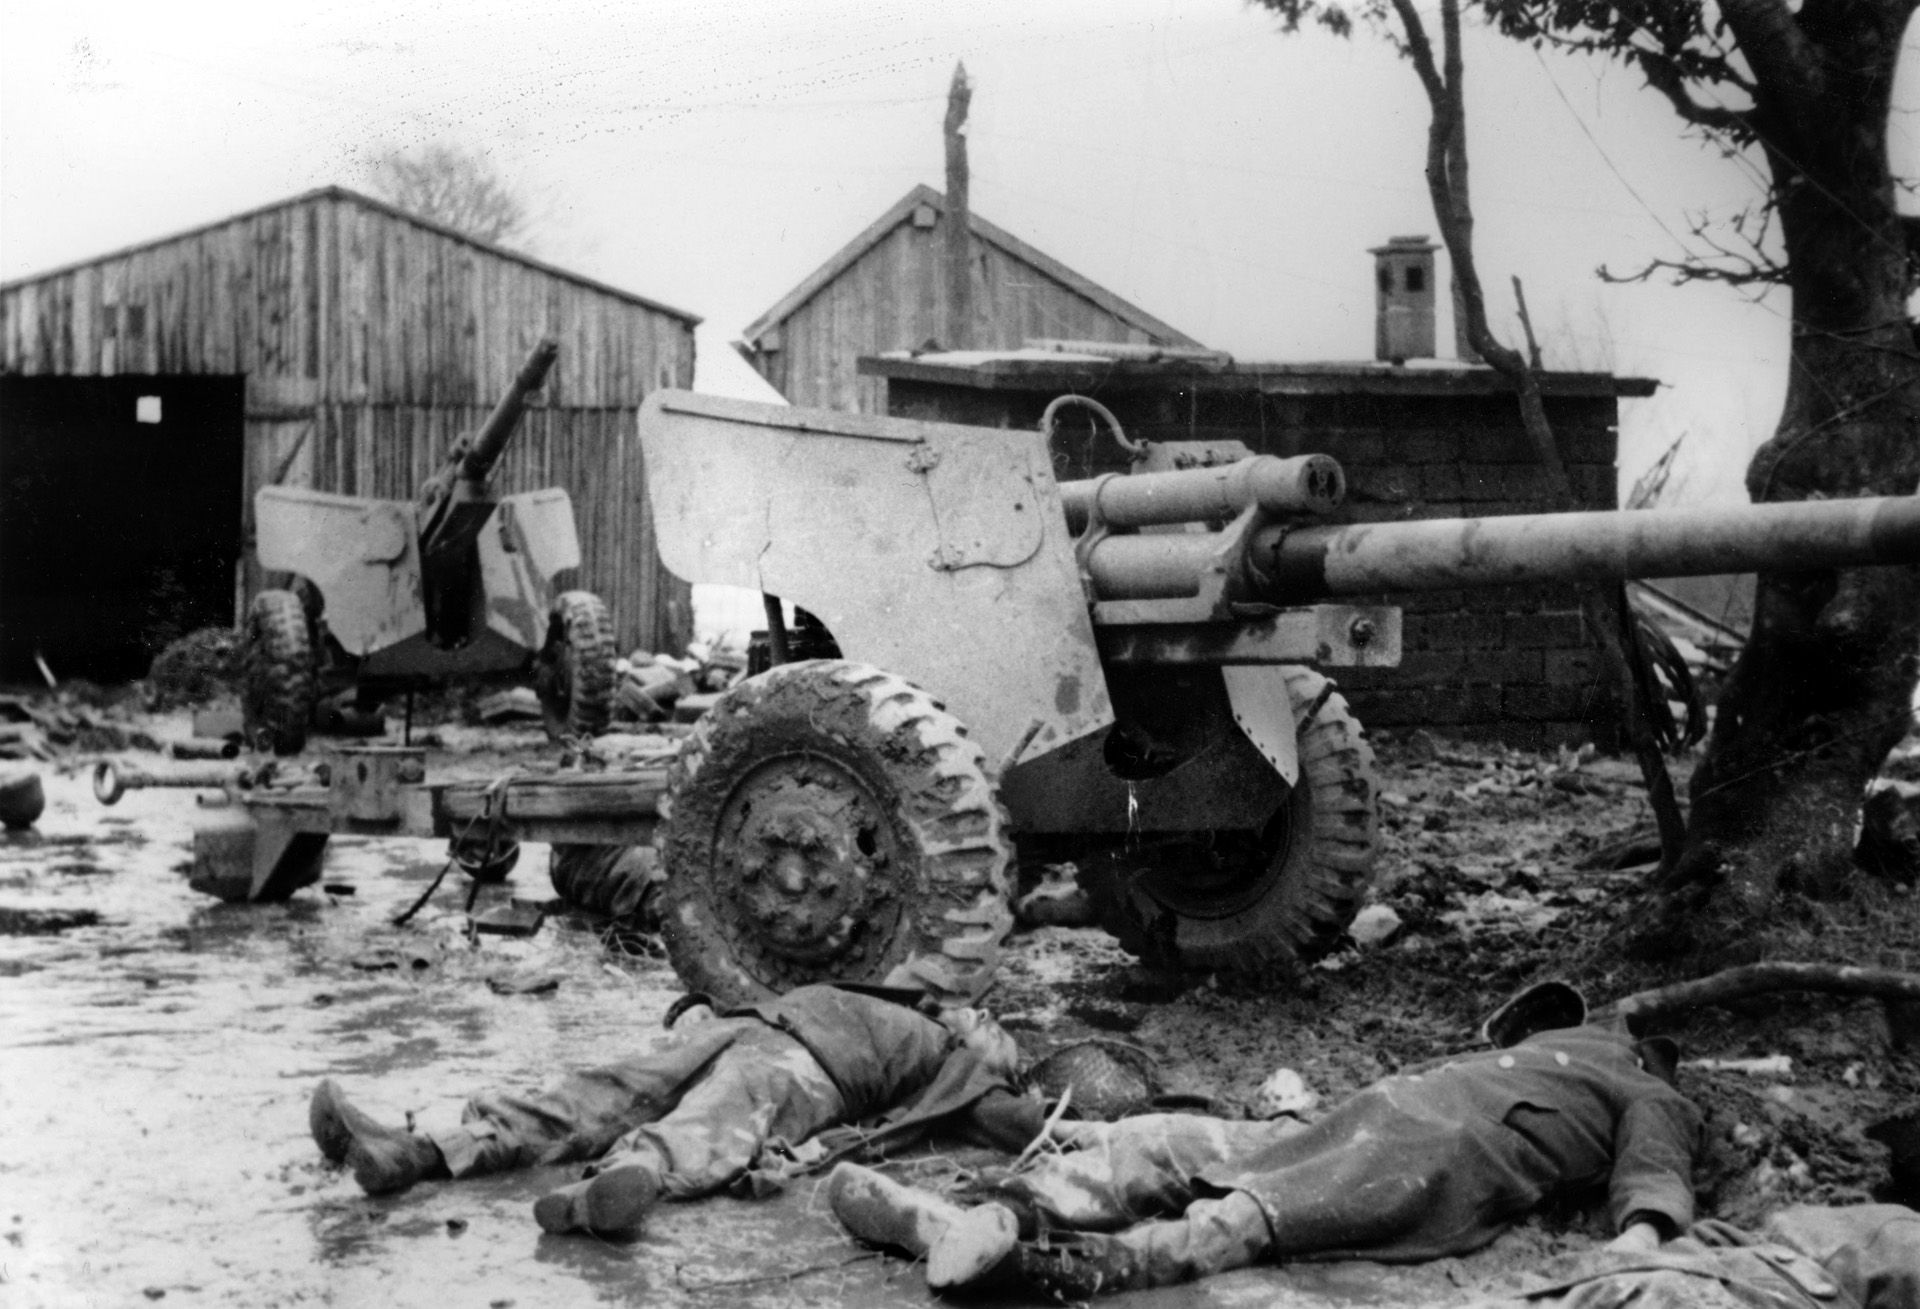 Killed in action during the early German advance at the Battle of the Bulge, the bodies of American soldiers sprawl beside their anti-tank gun. Although inexperienced, the soldiers of the 106th Infantry Division fought a spirited battle against the attacking Germans in the Ardennes Forest.